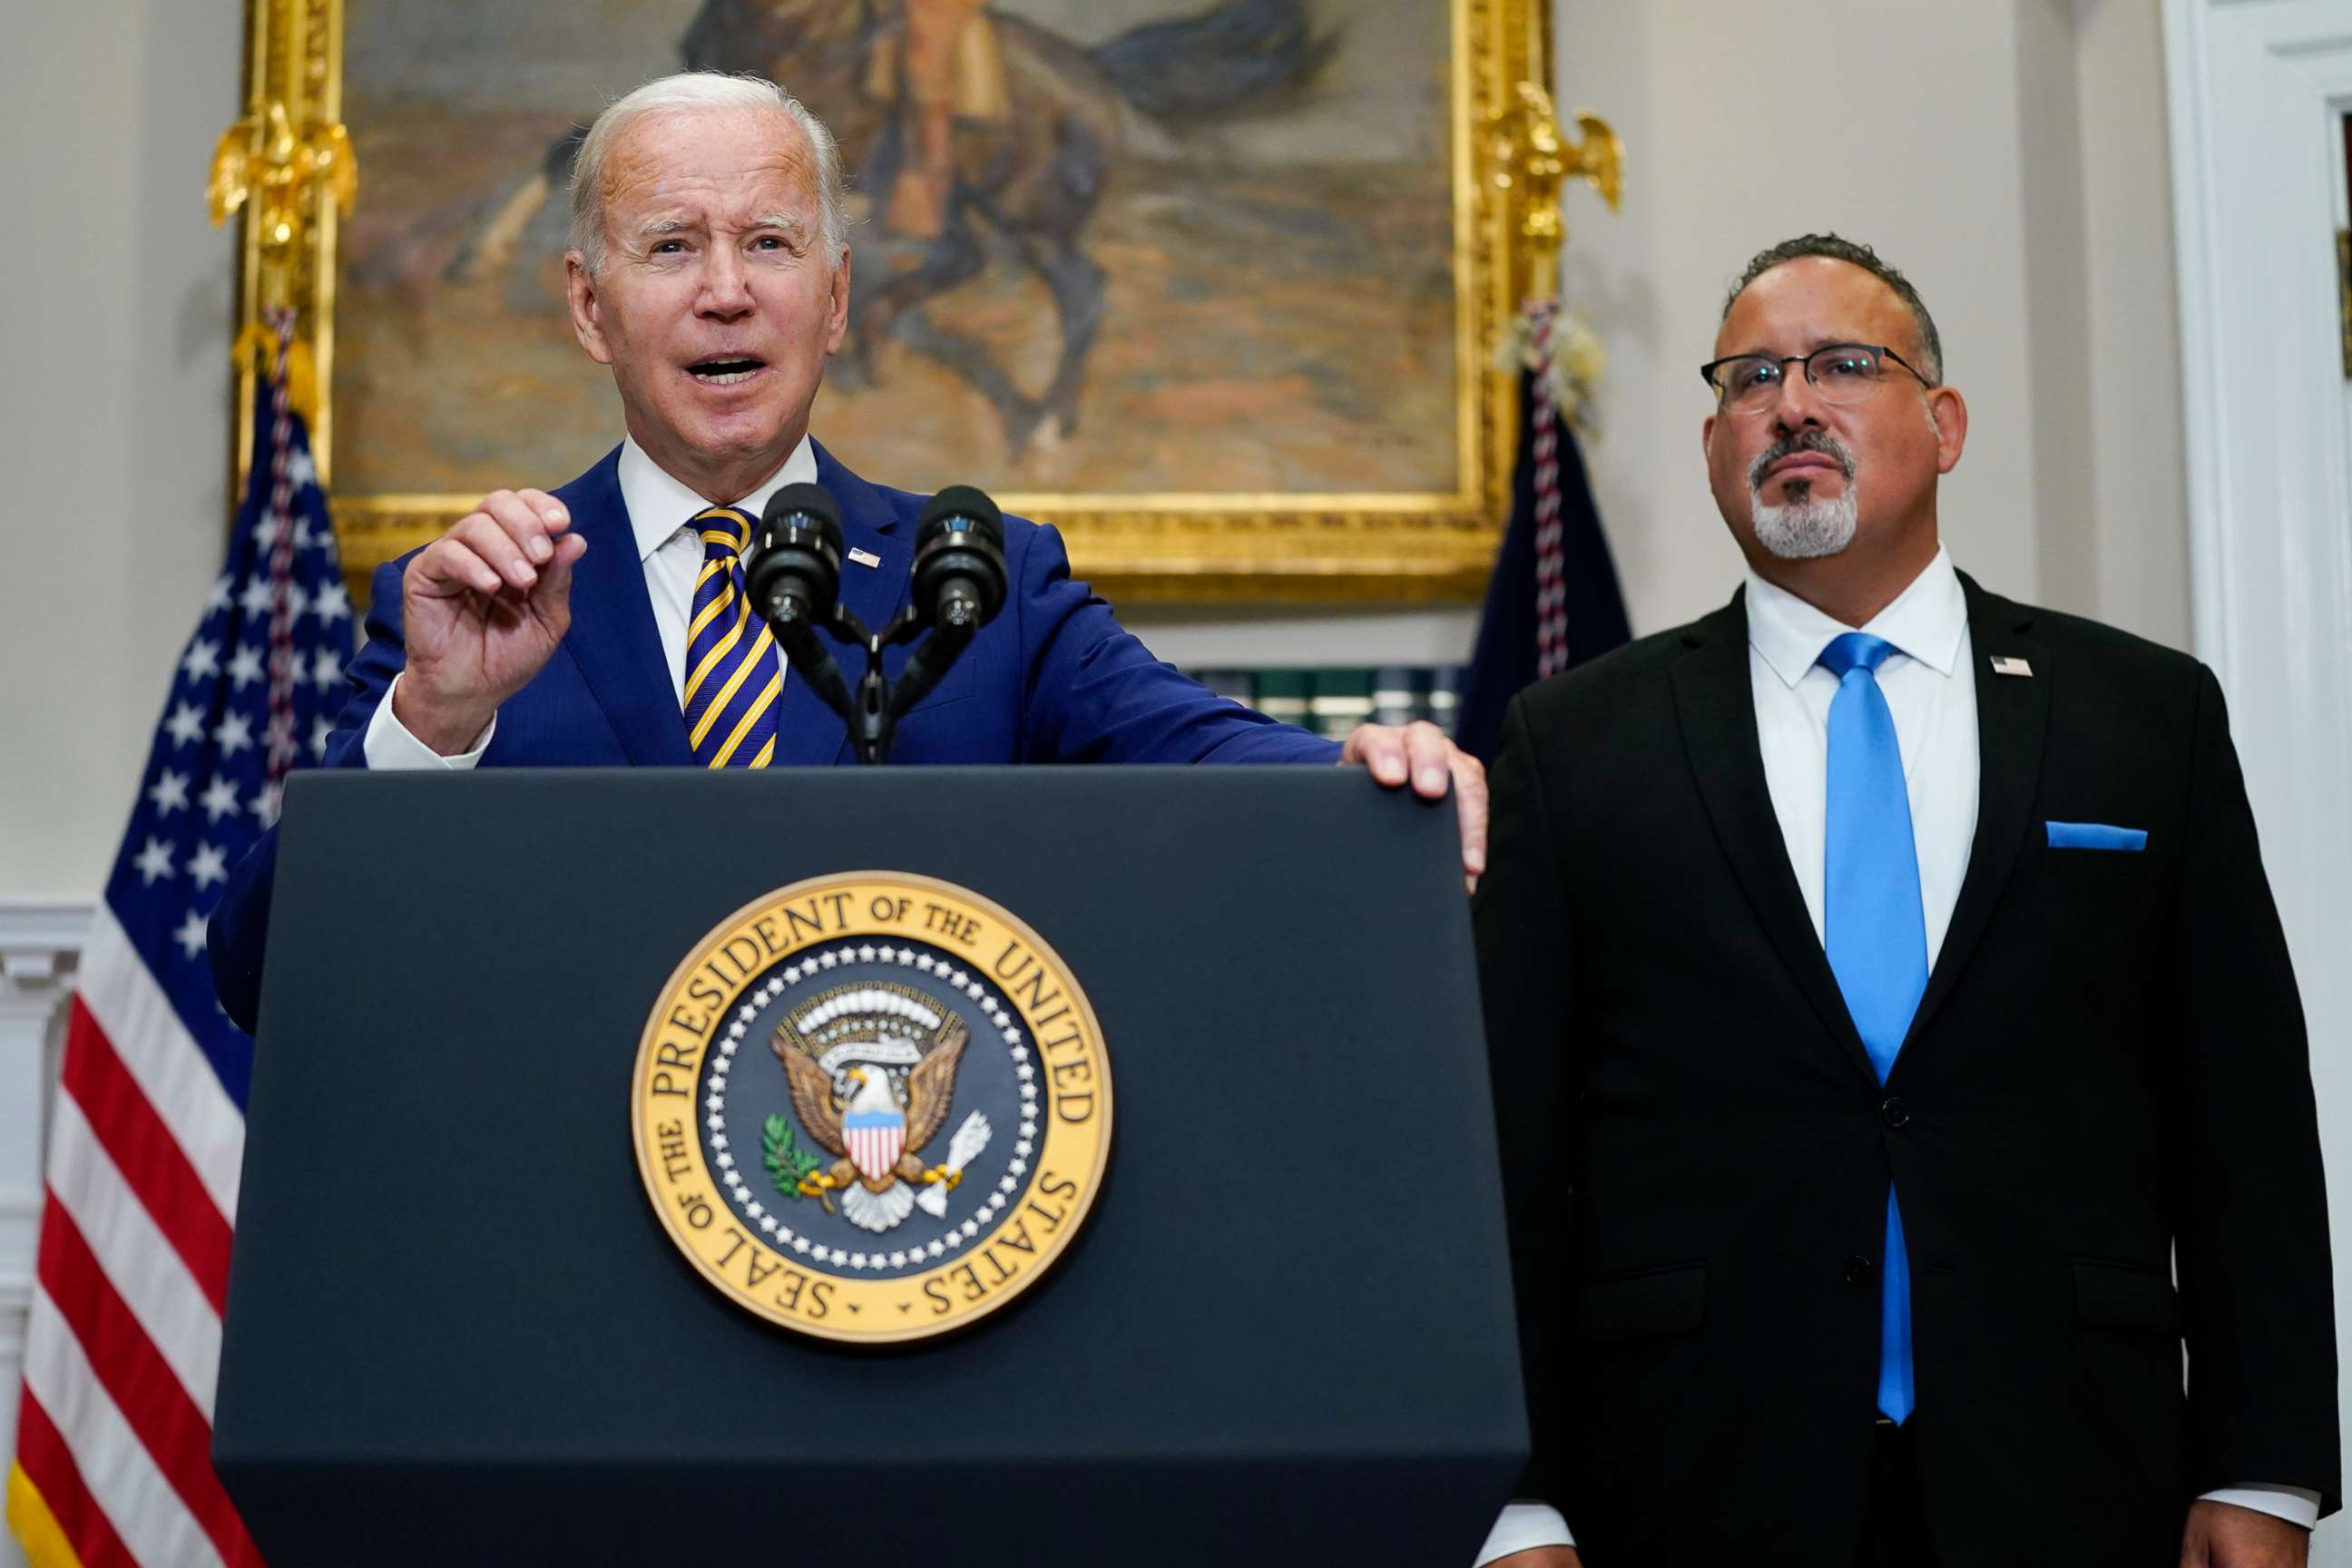 PHOTO: President Joe Biden speaks about student loan debt forgiveness with Education Secretary Miguel Cardona in the Roosevelt Room of the White House, Aug. 24, 2022.